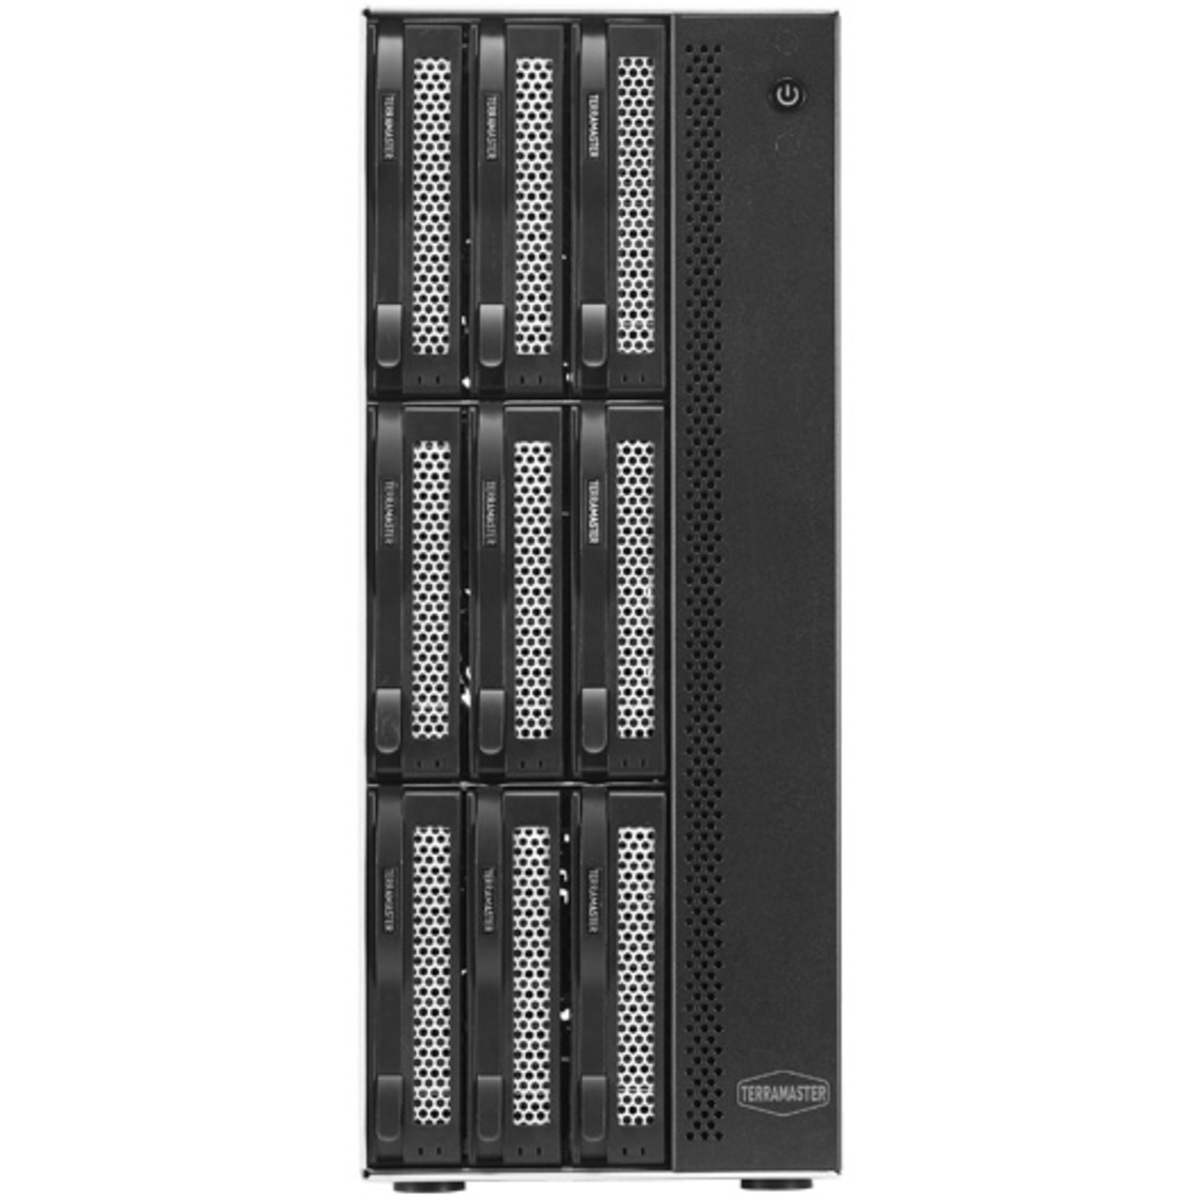 TerraMaster T9-423 72tb 9-Bay Desktop Multimedia / Power User / Business NAS - Network Attached Storage Device 9x8tb Seagate IronWolf ST8000VN004 3.5 7200rpm SATA 6Gb/s HDD NAS Class Drives Installed - Burn-In Tested T9-423